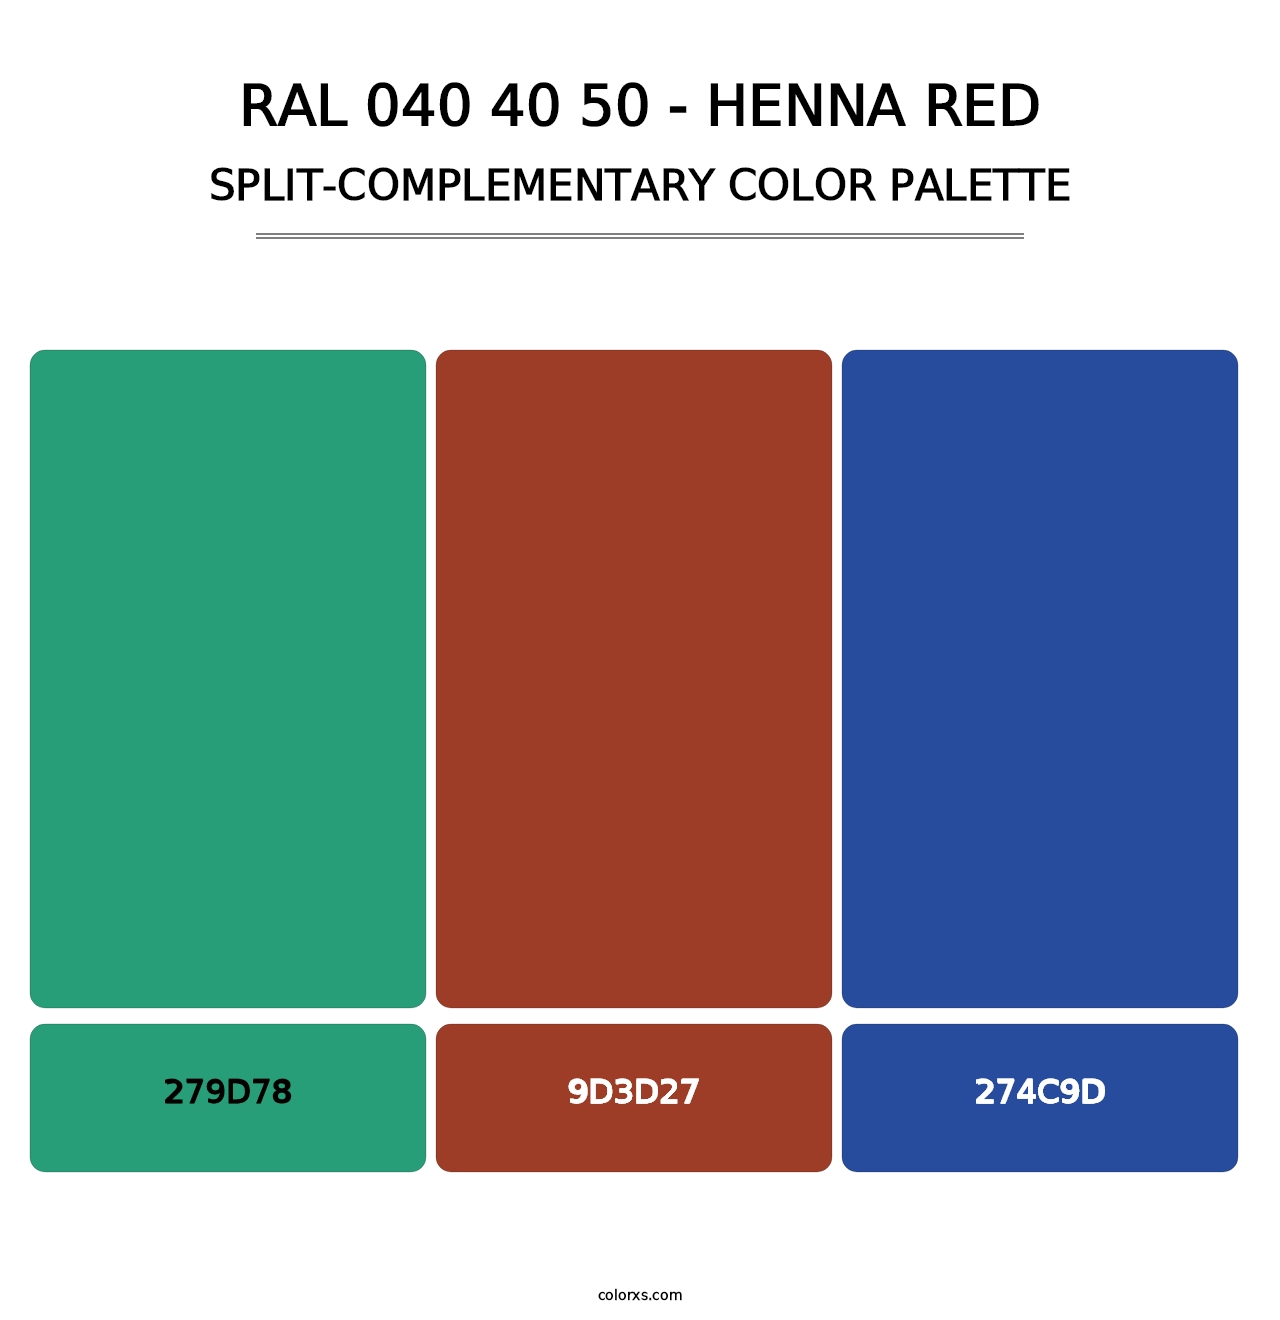 RAL 040 40 50 - Henna Red - Split-Complementary Color Palette